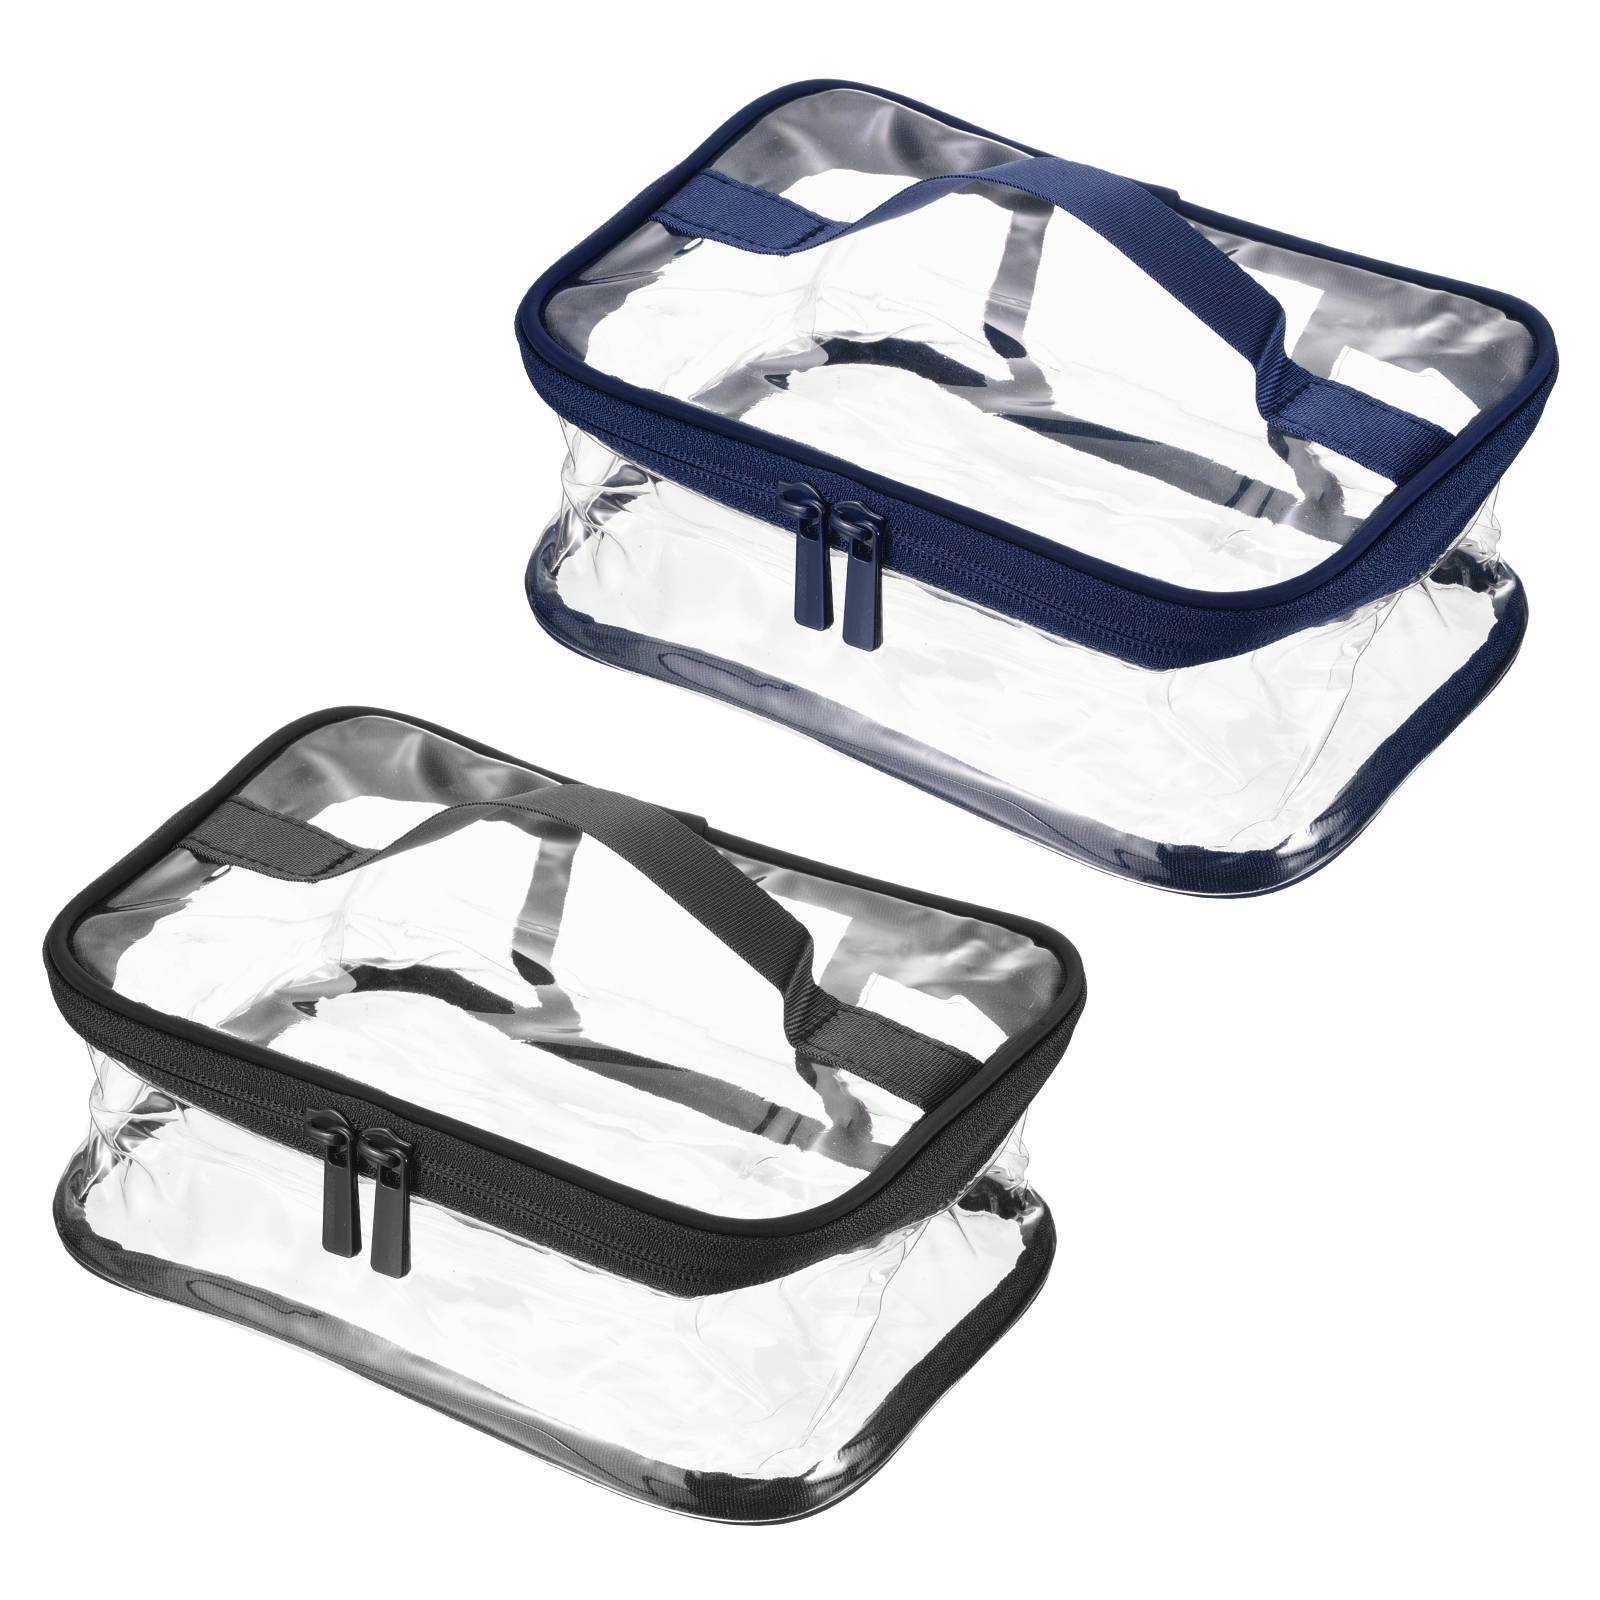 Uxcell PVC Clear Toiletry Bag Makeup Pouch with Zipper Handle, Black, Navy Blue 1 Set/2 Pack - image 1 of 6